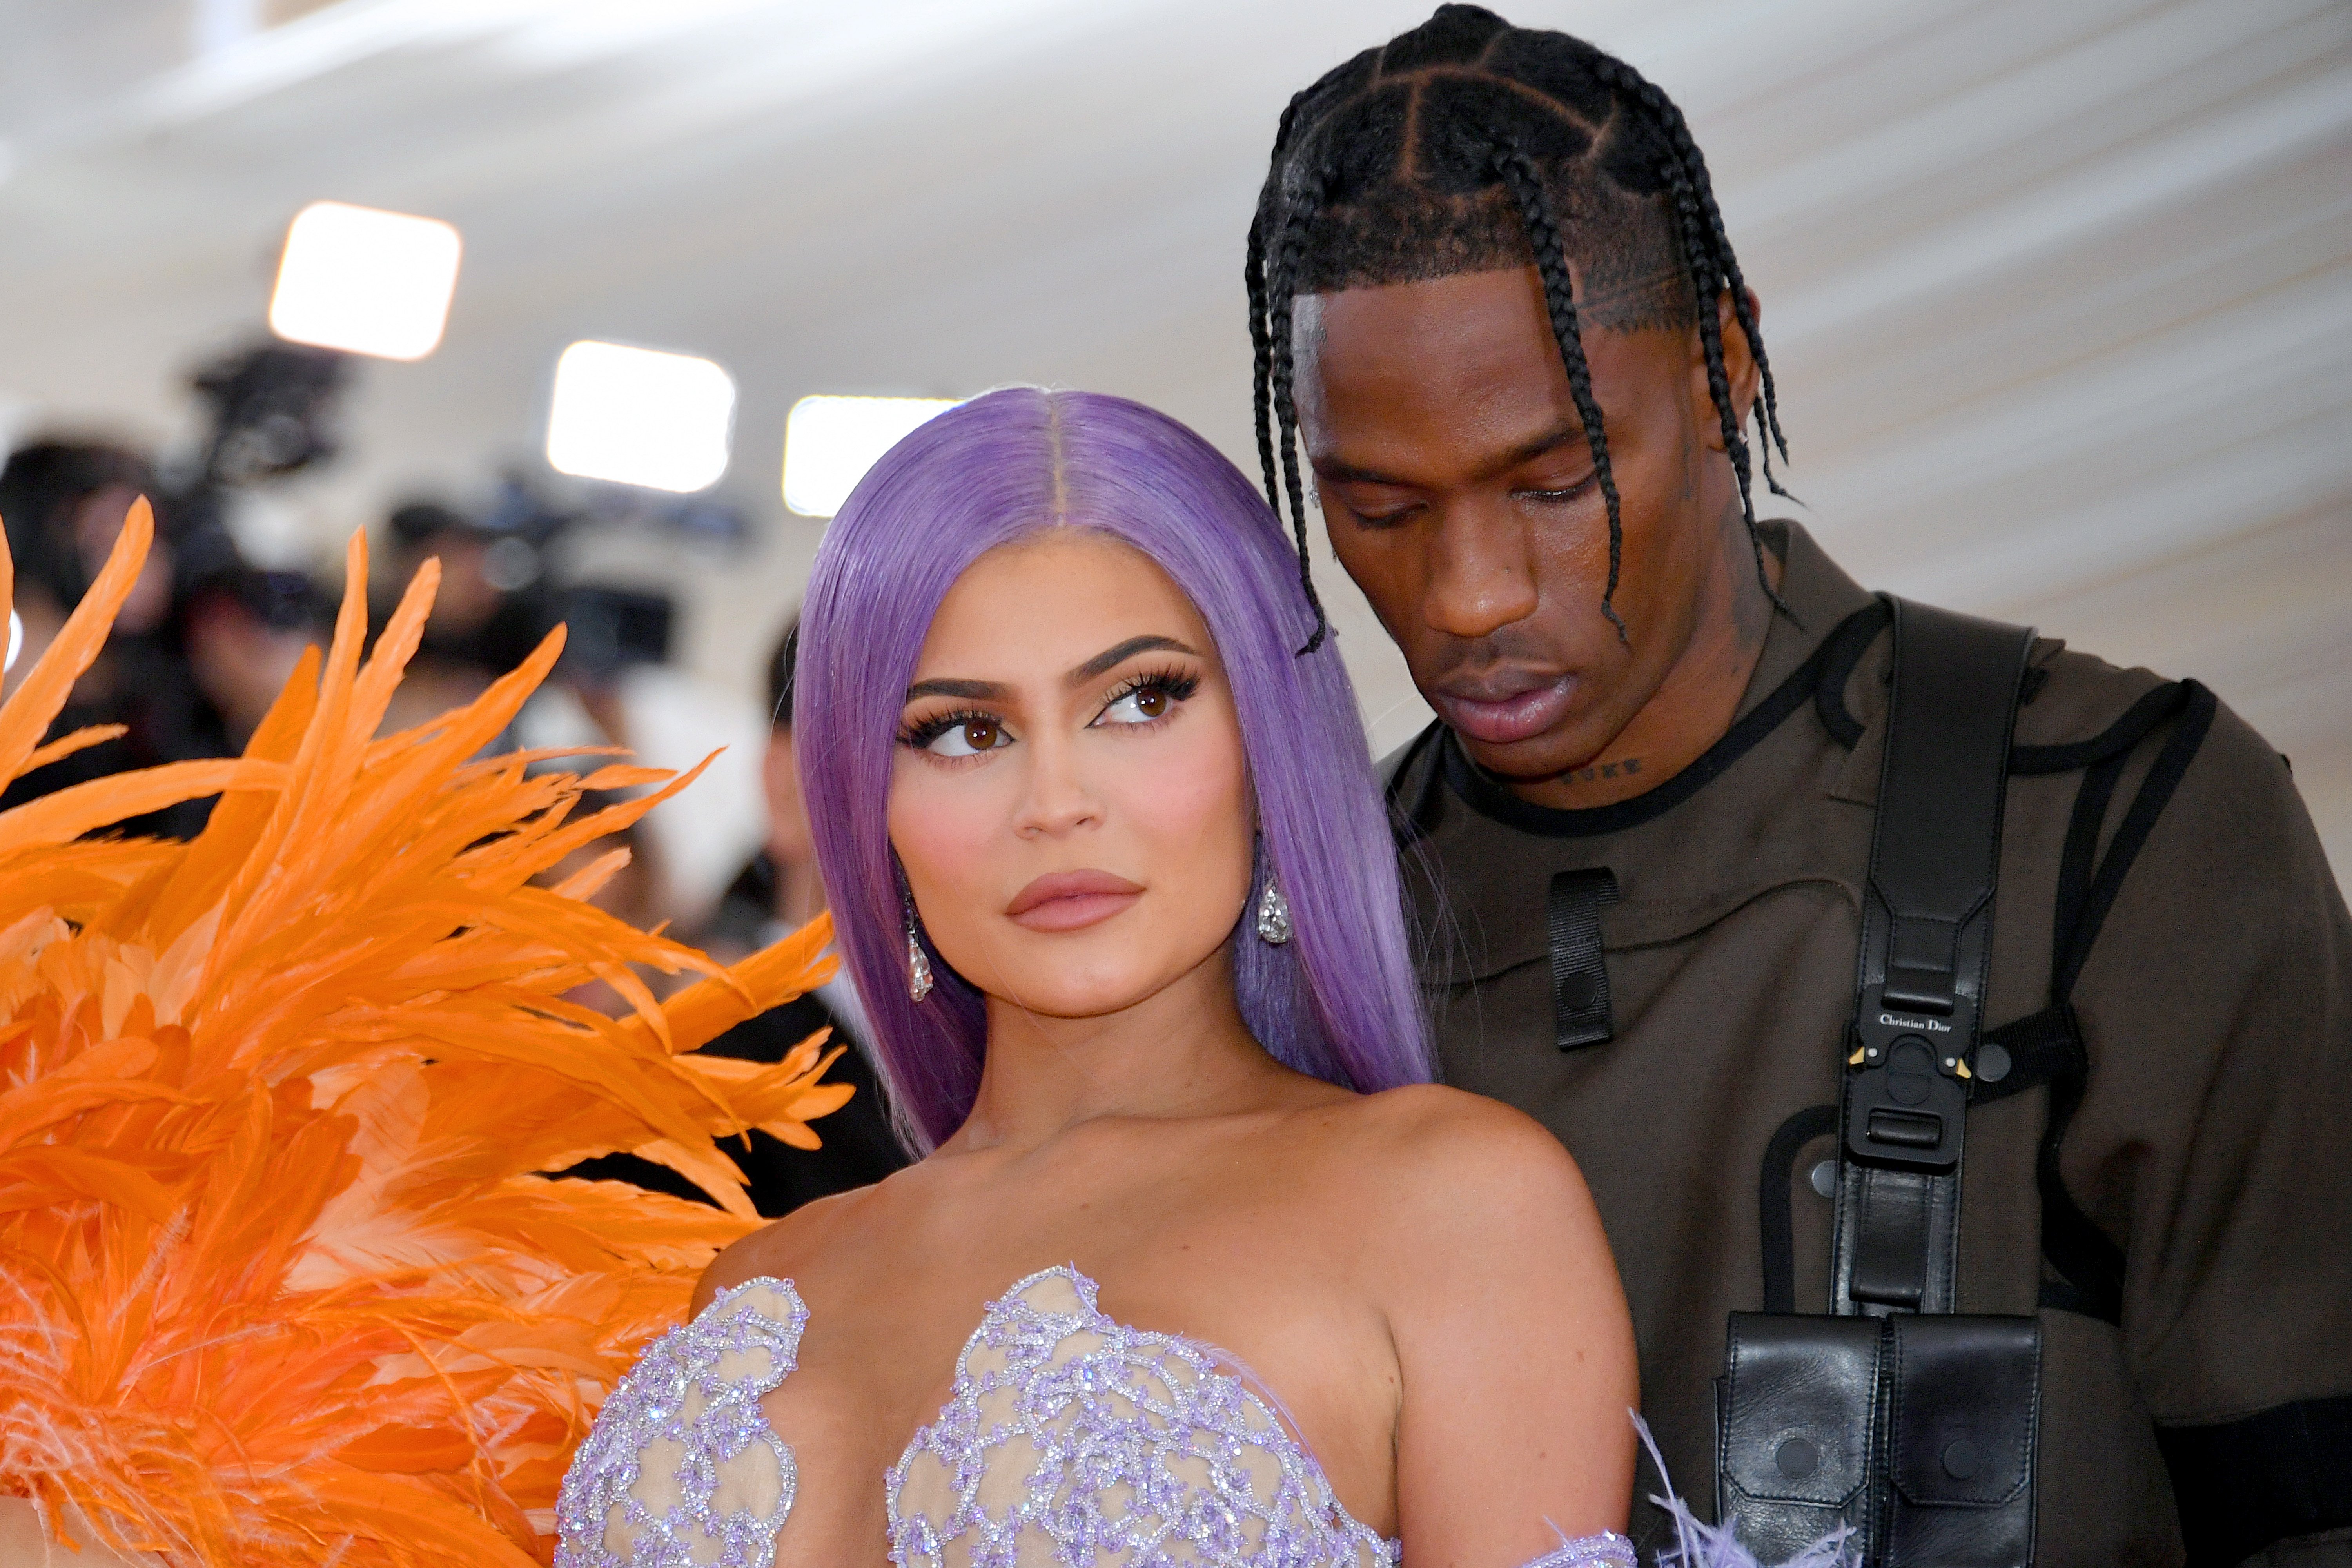 Kylie Jenner and Travis Scott pictured at The 2019 Met Gala on May 06, 2019 in New York City. | Source: Getty Images